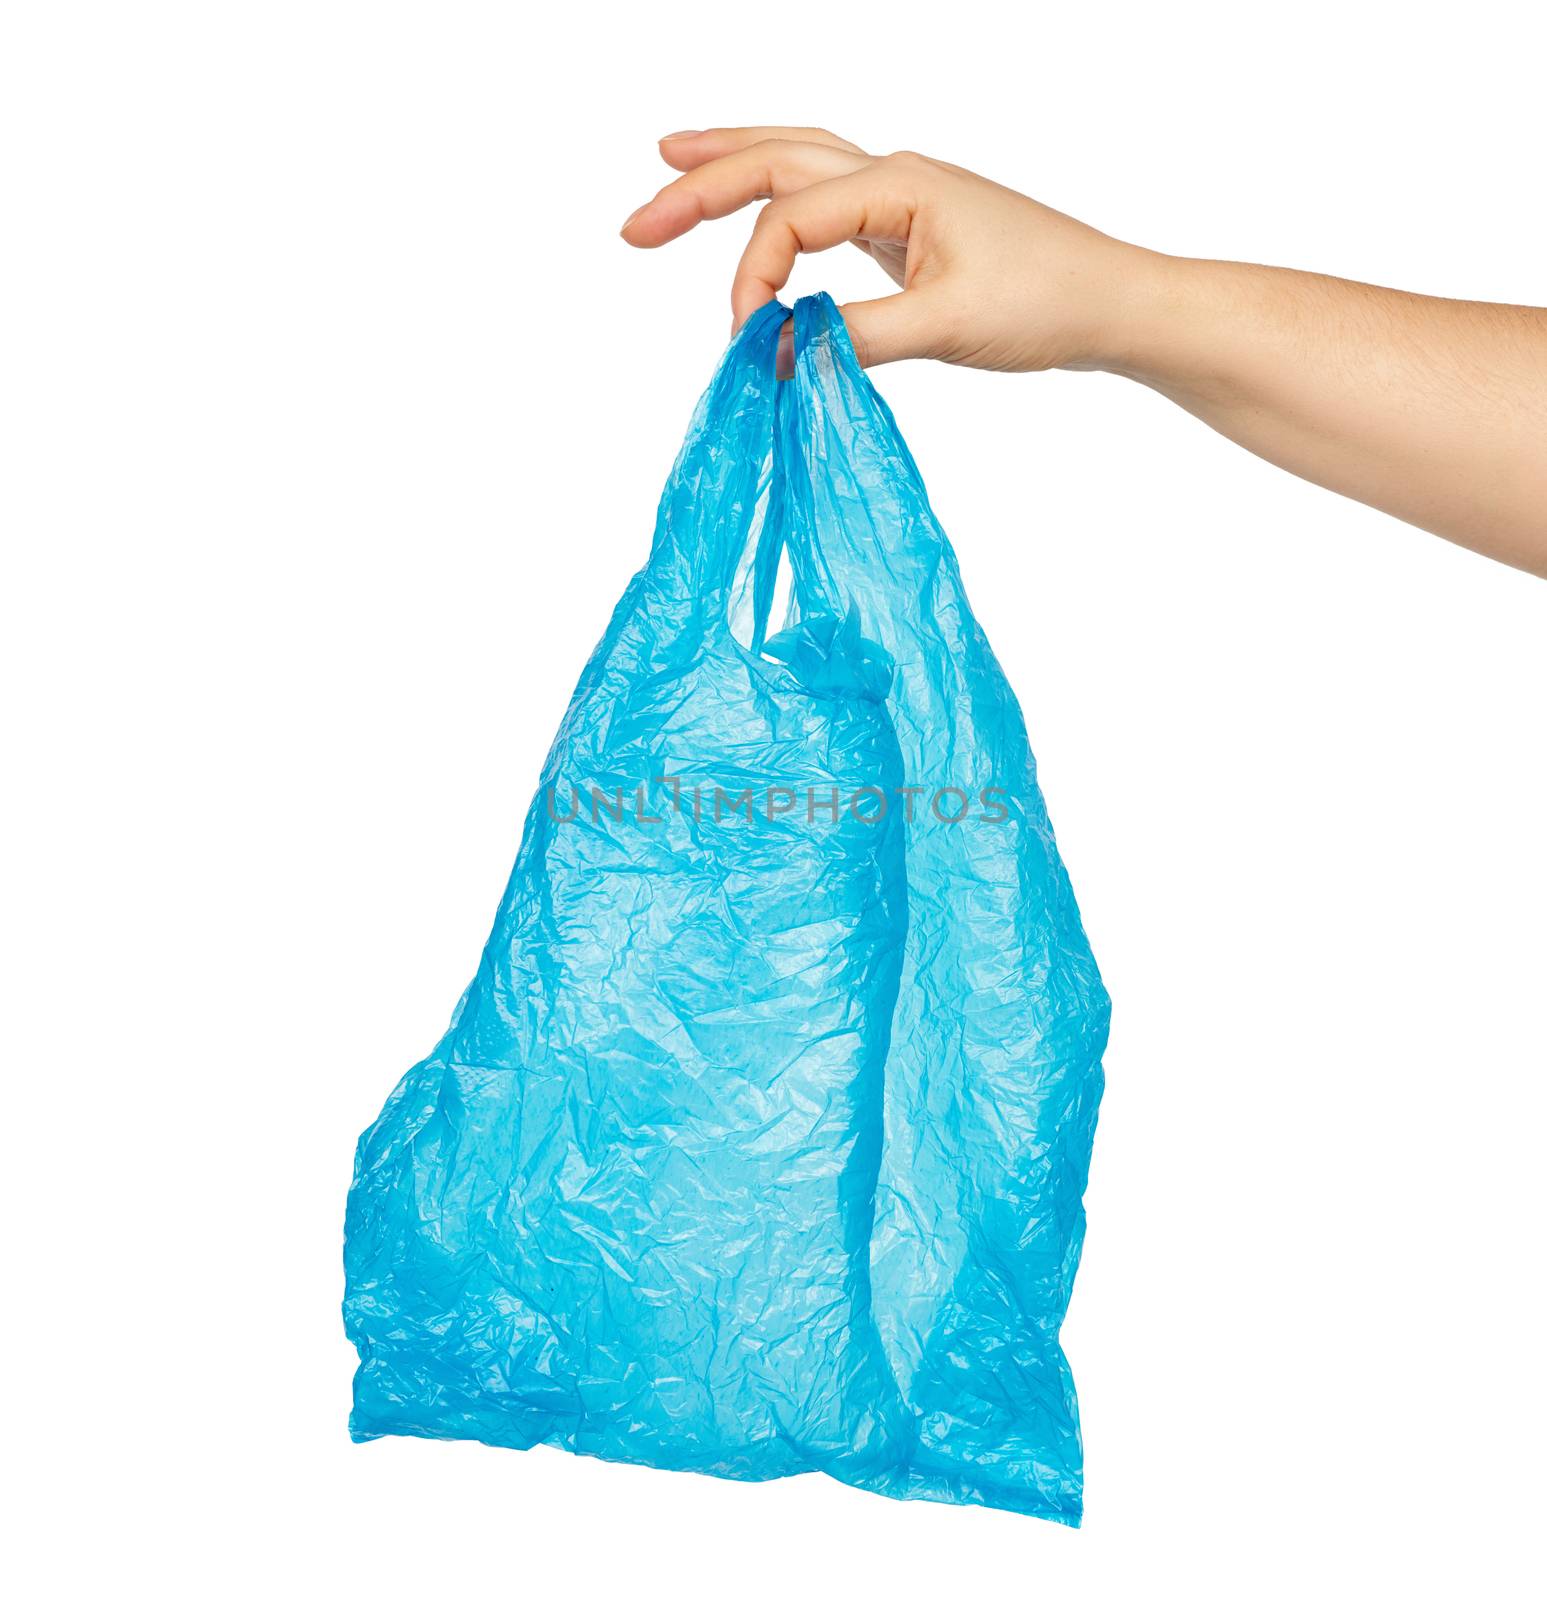 hand holds an empty blue plastic bag on a white background, conc by ndanko